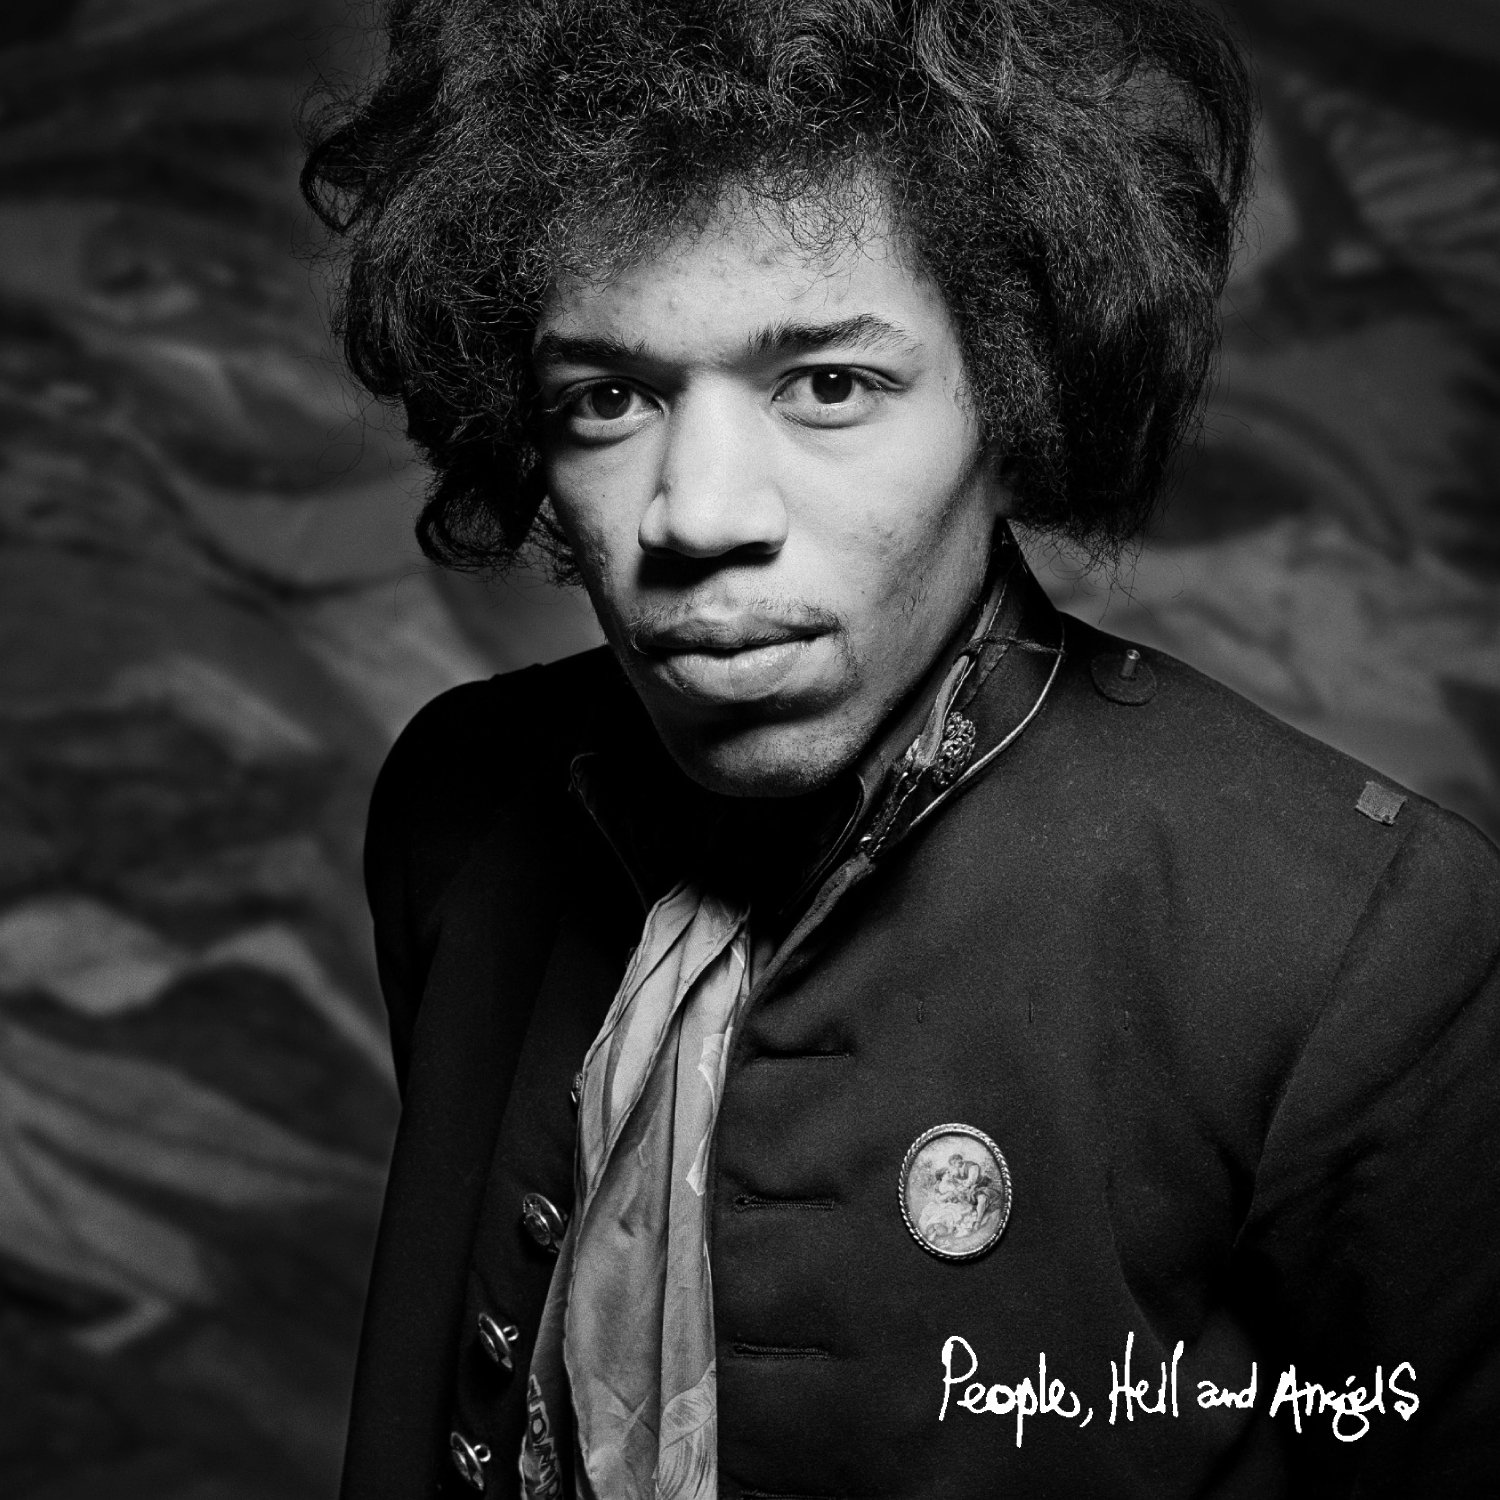 Jimi Hendrix’s People, Hell & Angels coming March 8, 2013